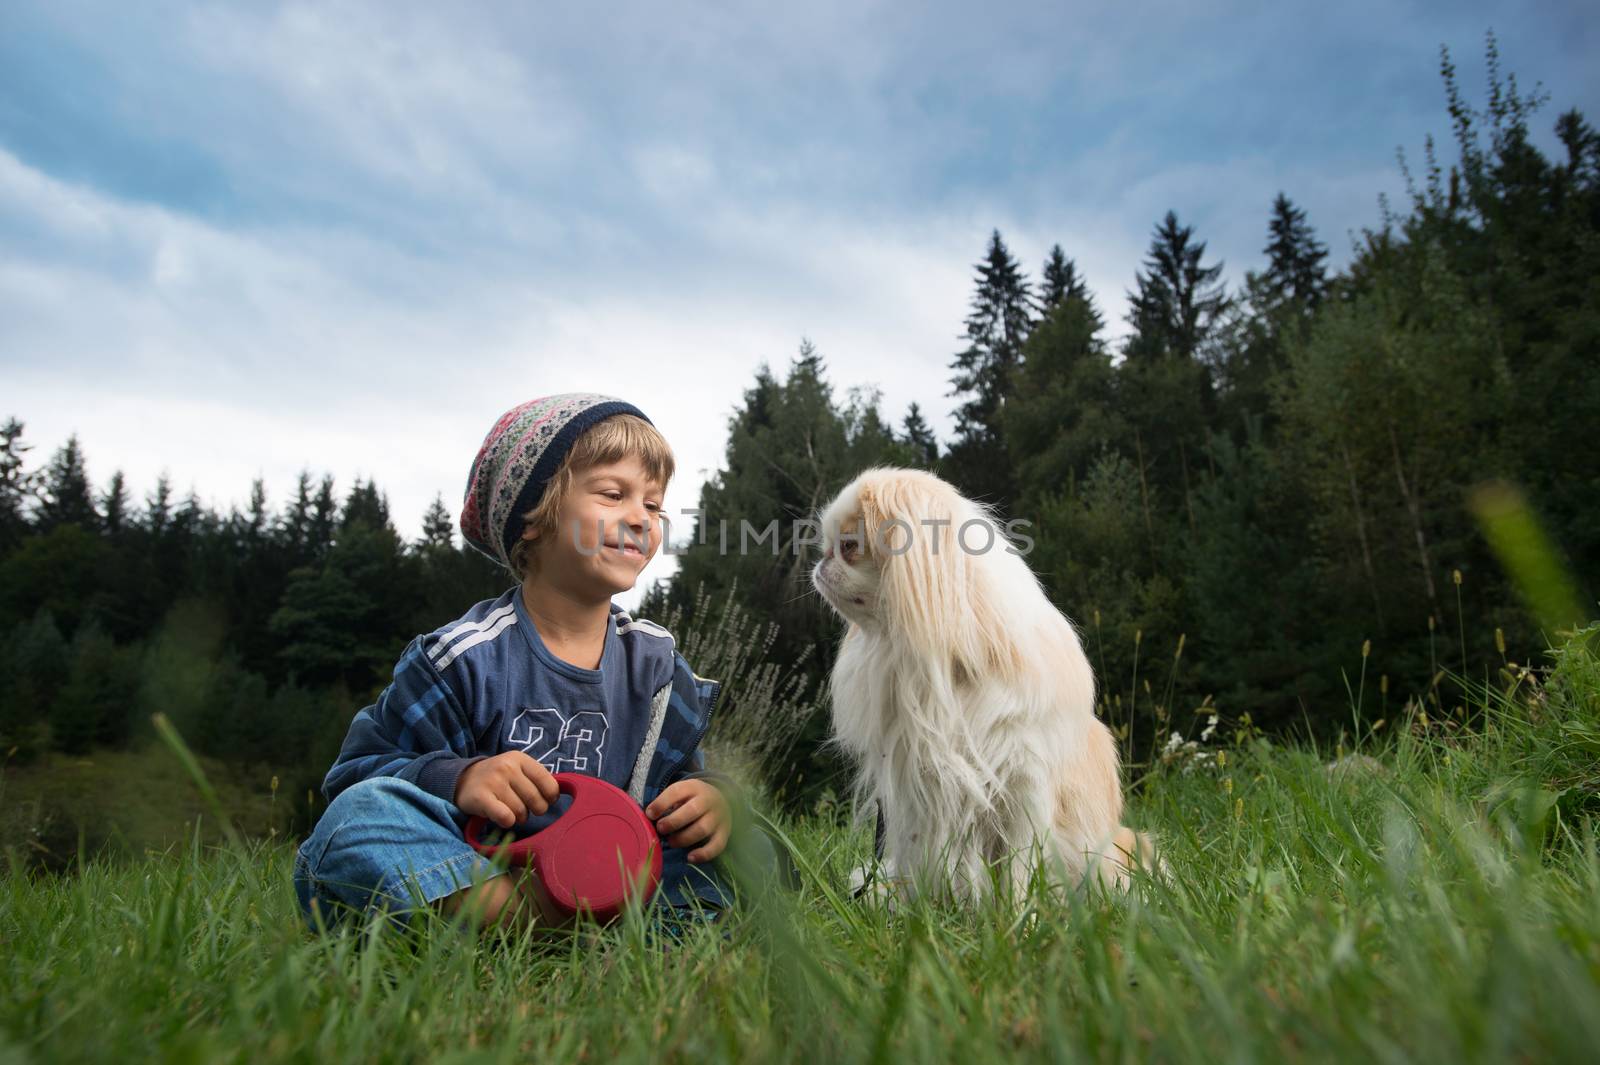 Cute little boy sitting in the meadow smiling at his dog  Best friends concept.